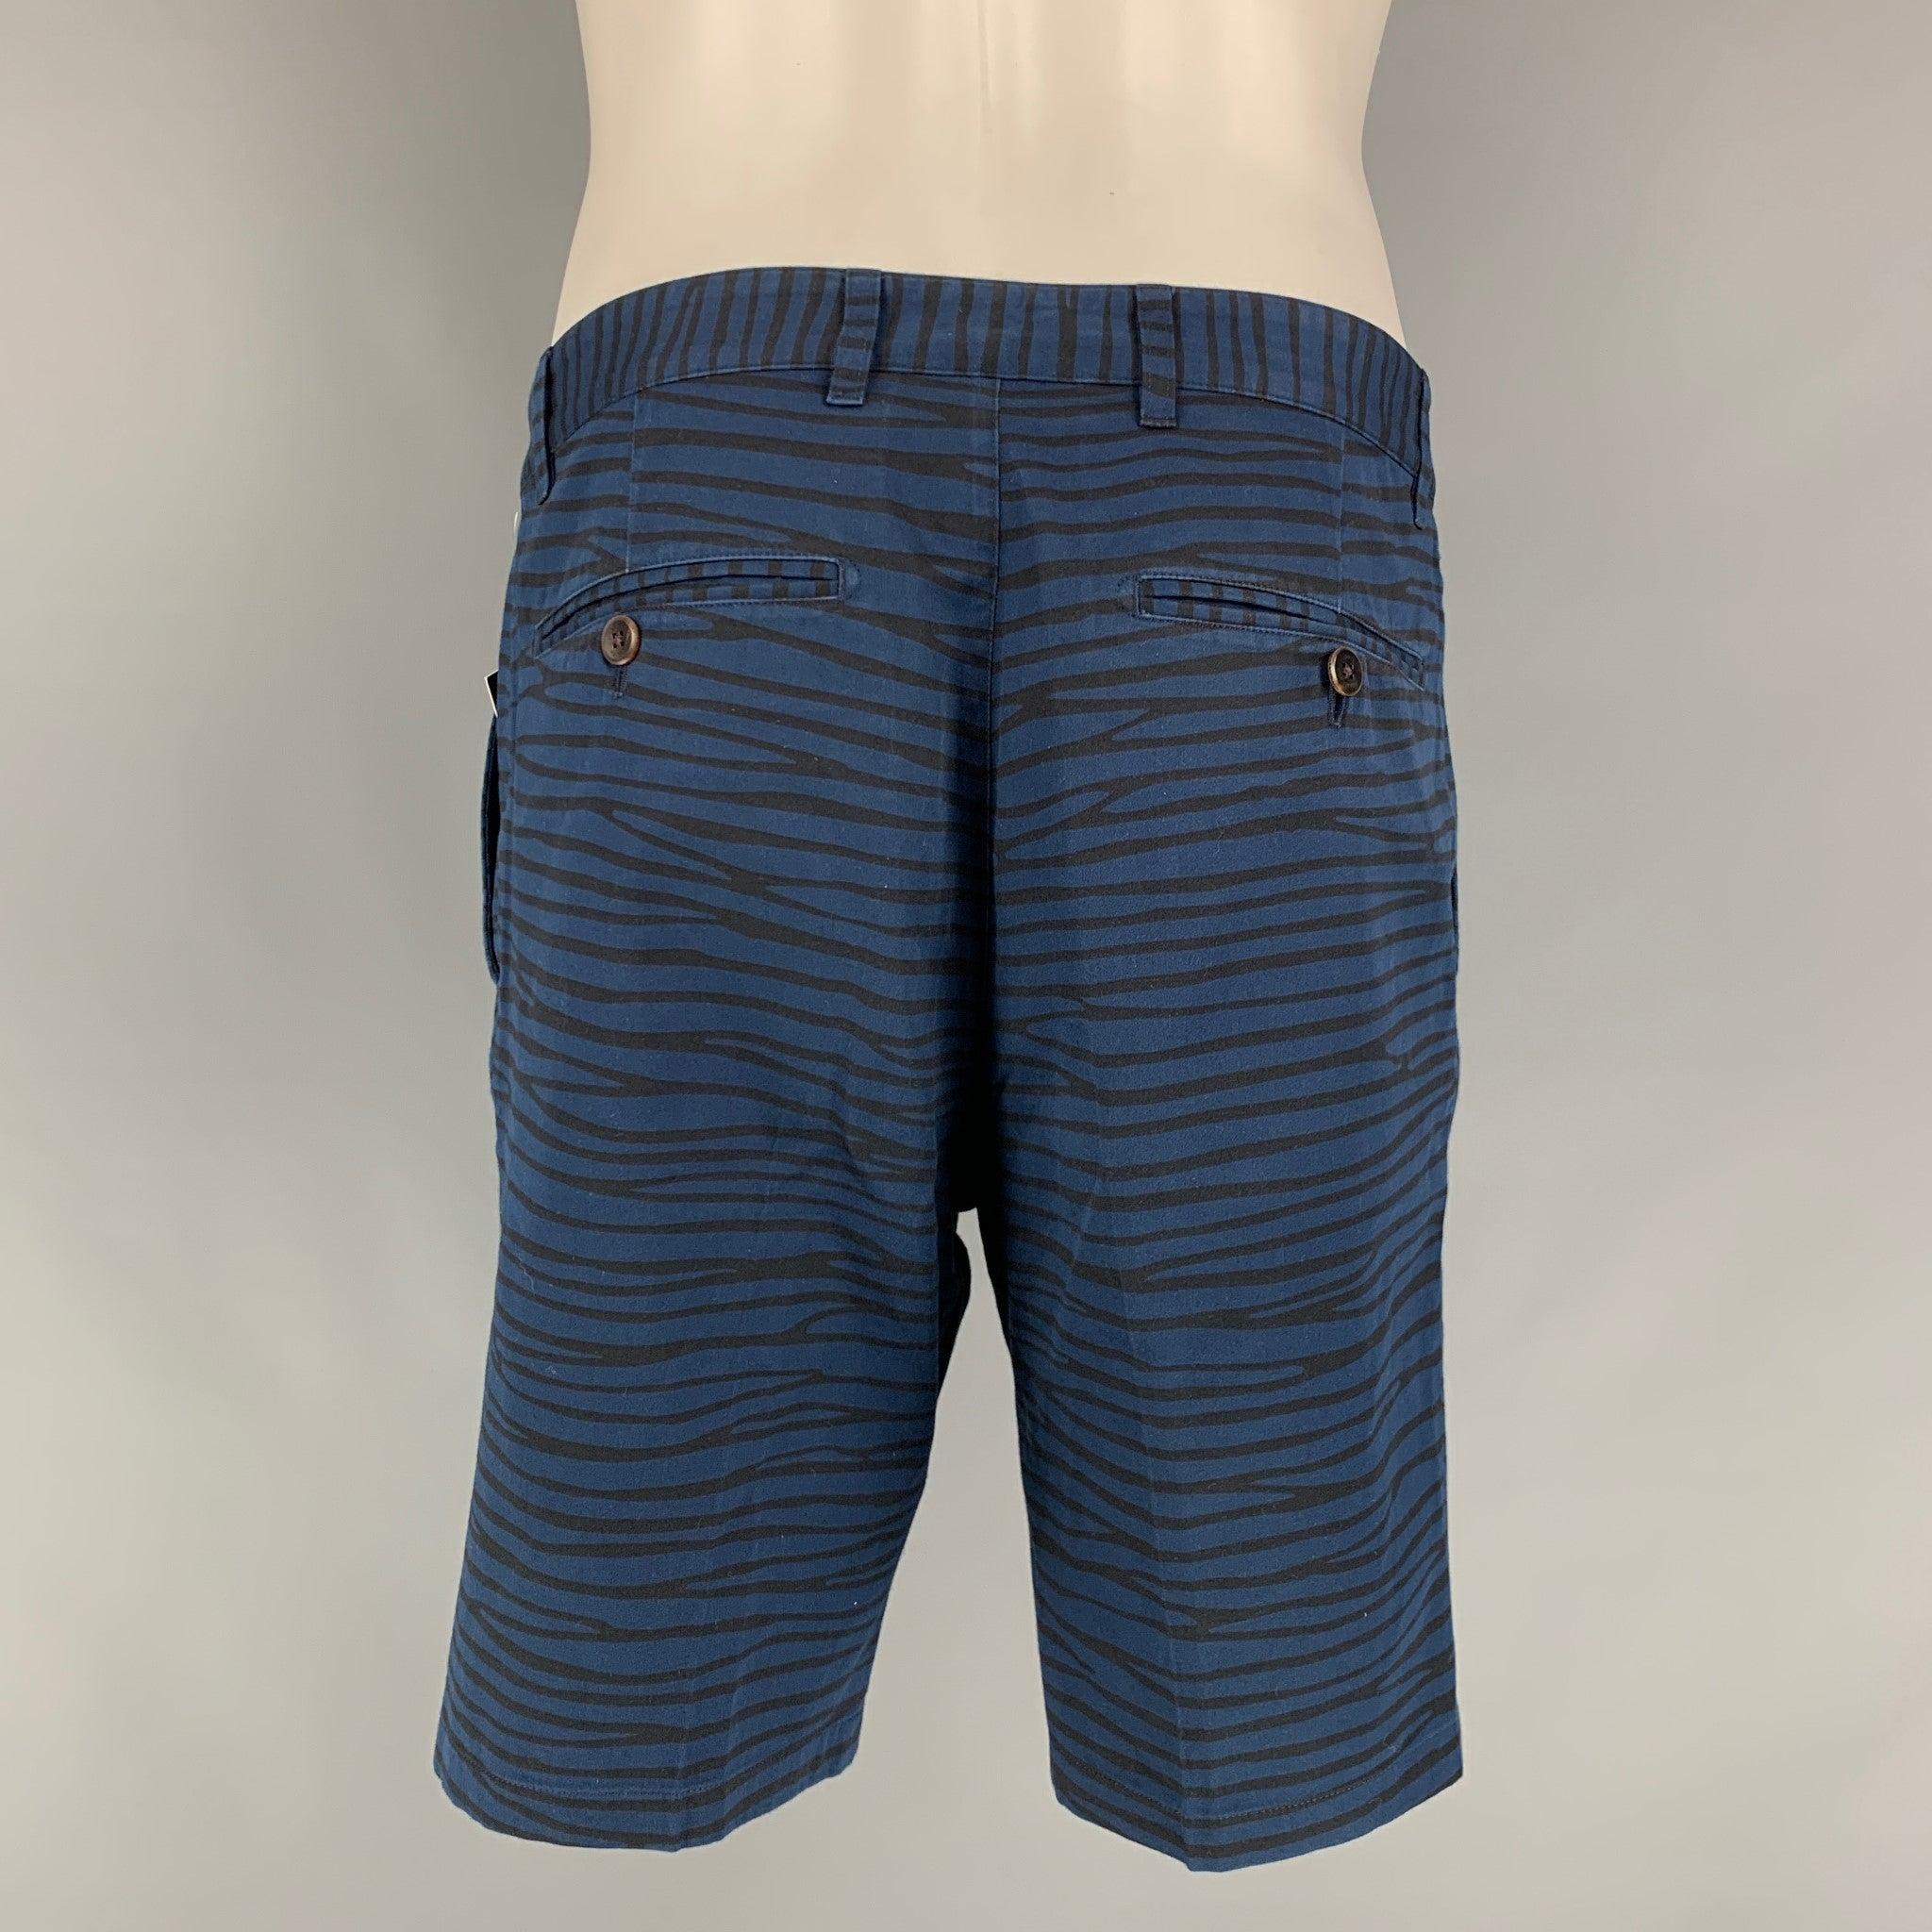 LOUIS VUITTON casual shorts come in navy blue cotton featuring a zebra print, zip up closure and a straight fit. Made in Italy.Very Good Pre-Owned Condition 

Marked:   40 

Measurements: 
  Waist: 32 inches Rise: 10 inches Inseam: 9 inches  
 
 

 